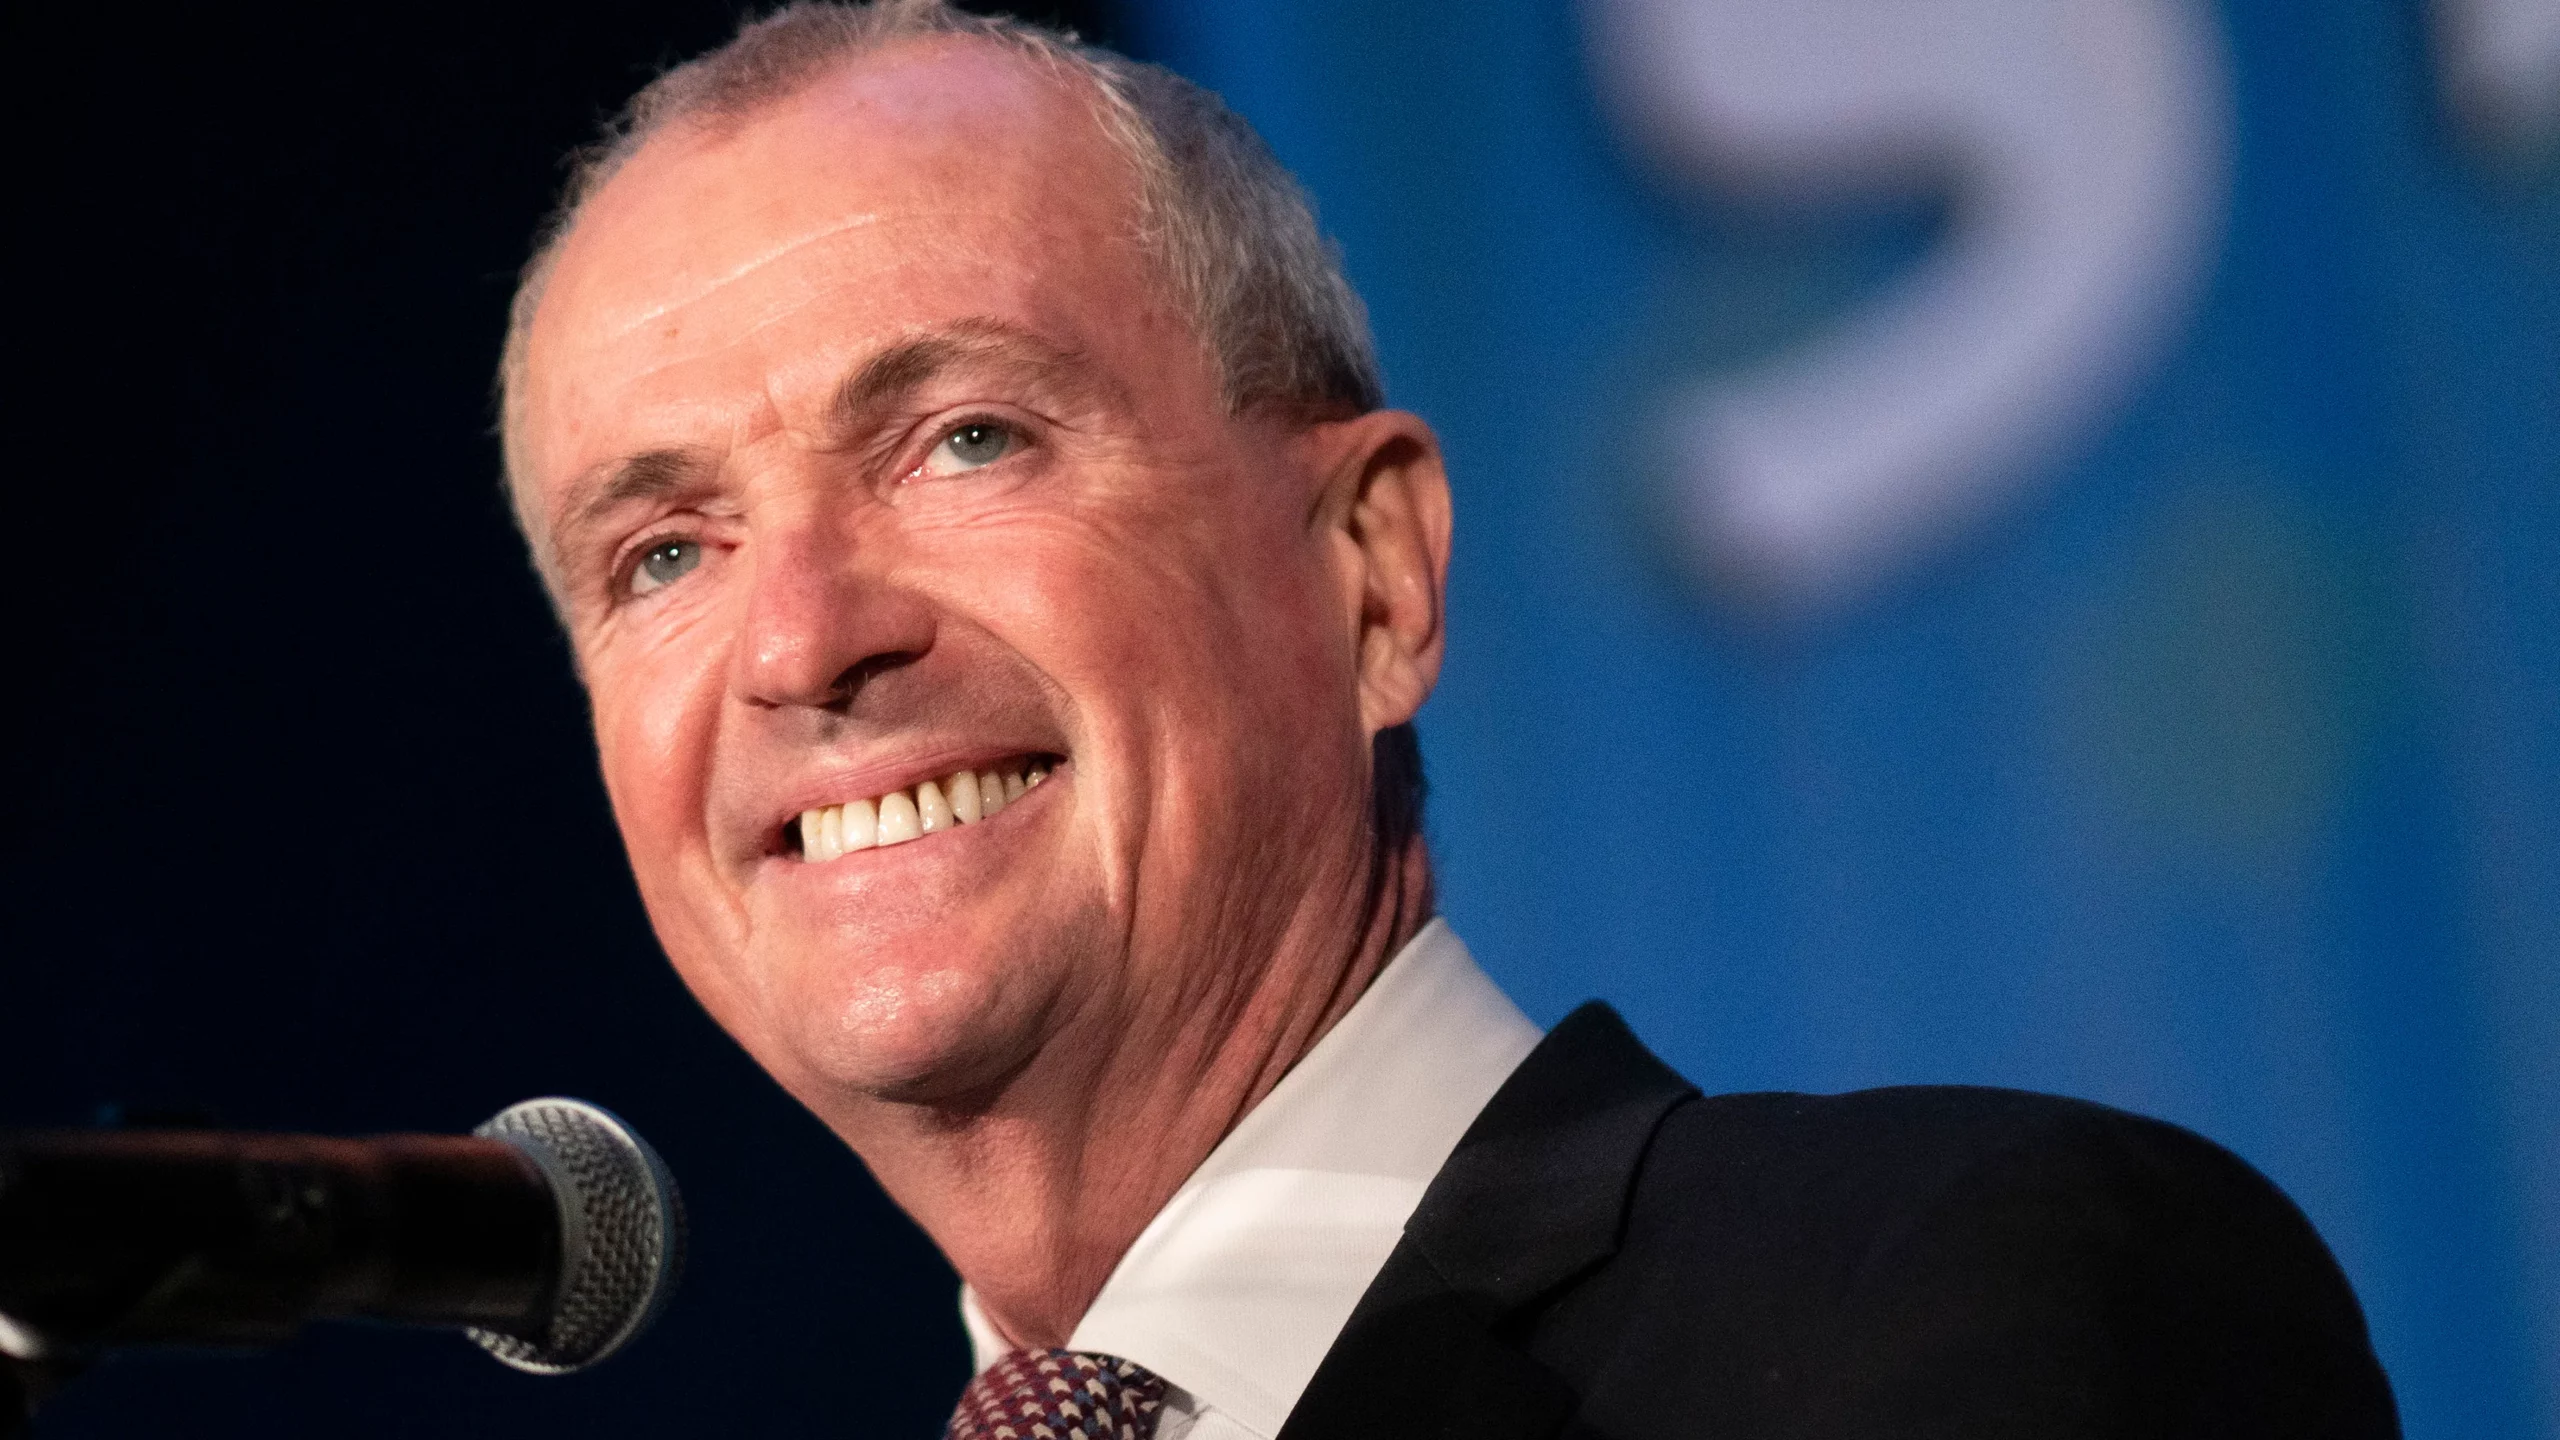 NJ Gov. Phil Murphy surgery a success, governor at home recovering